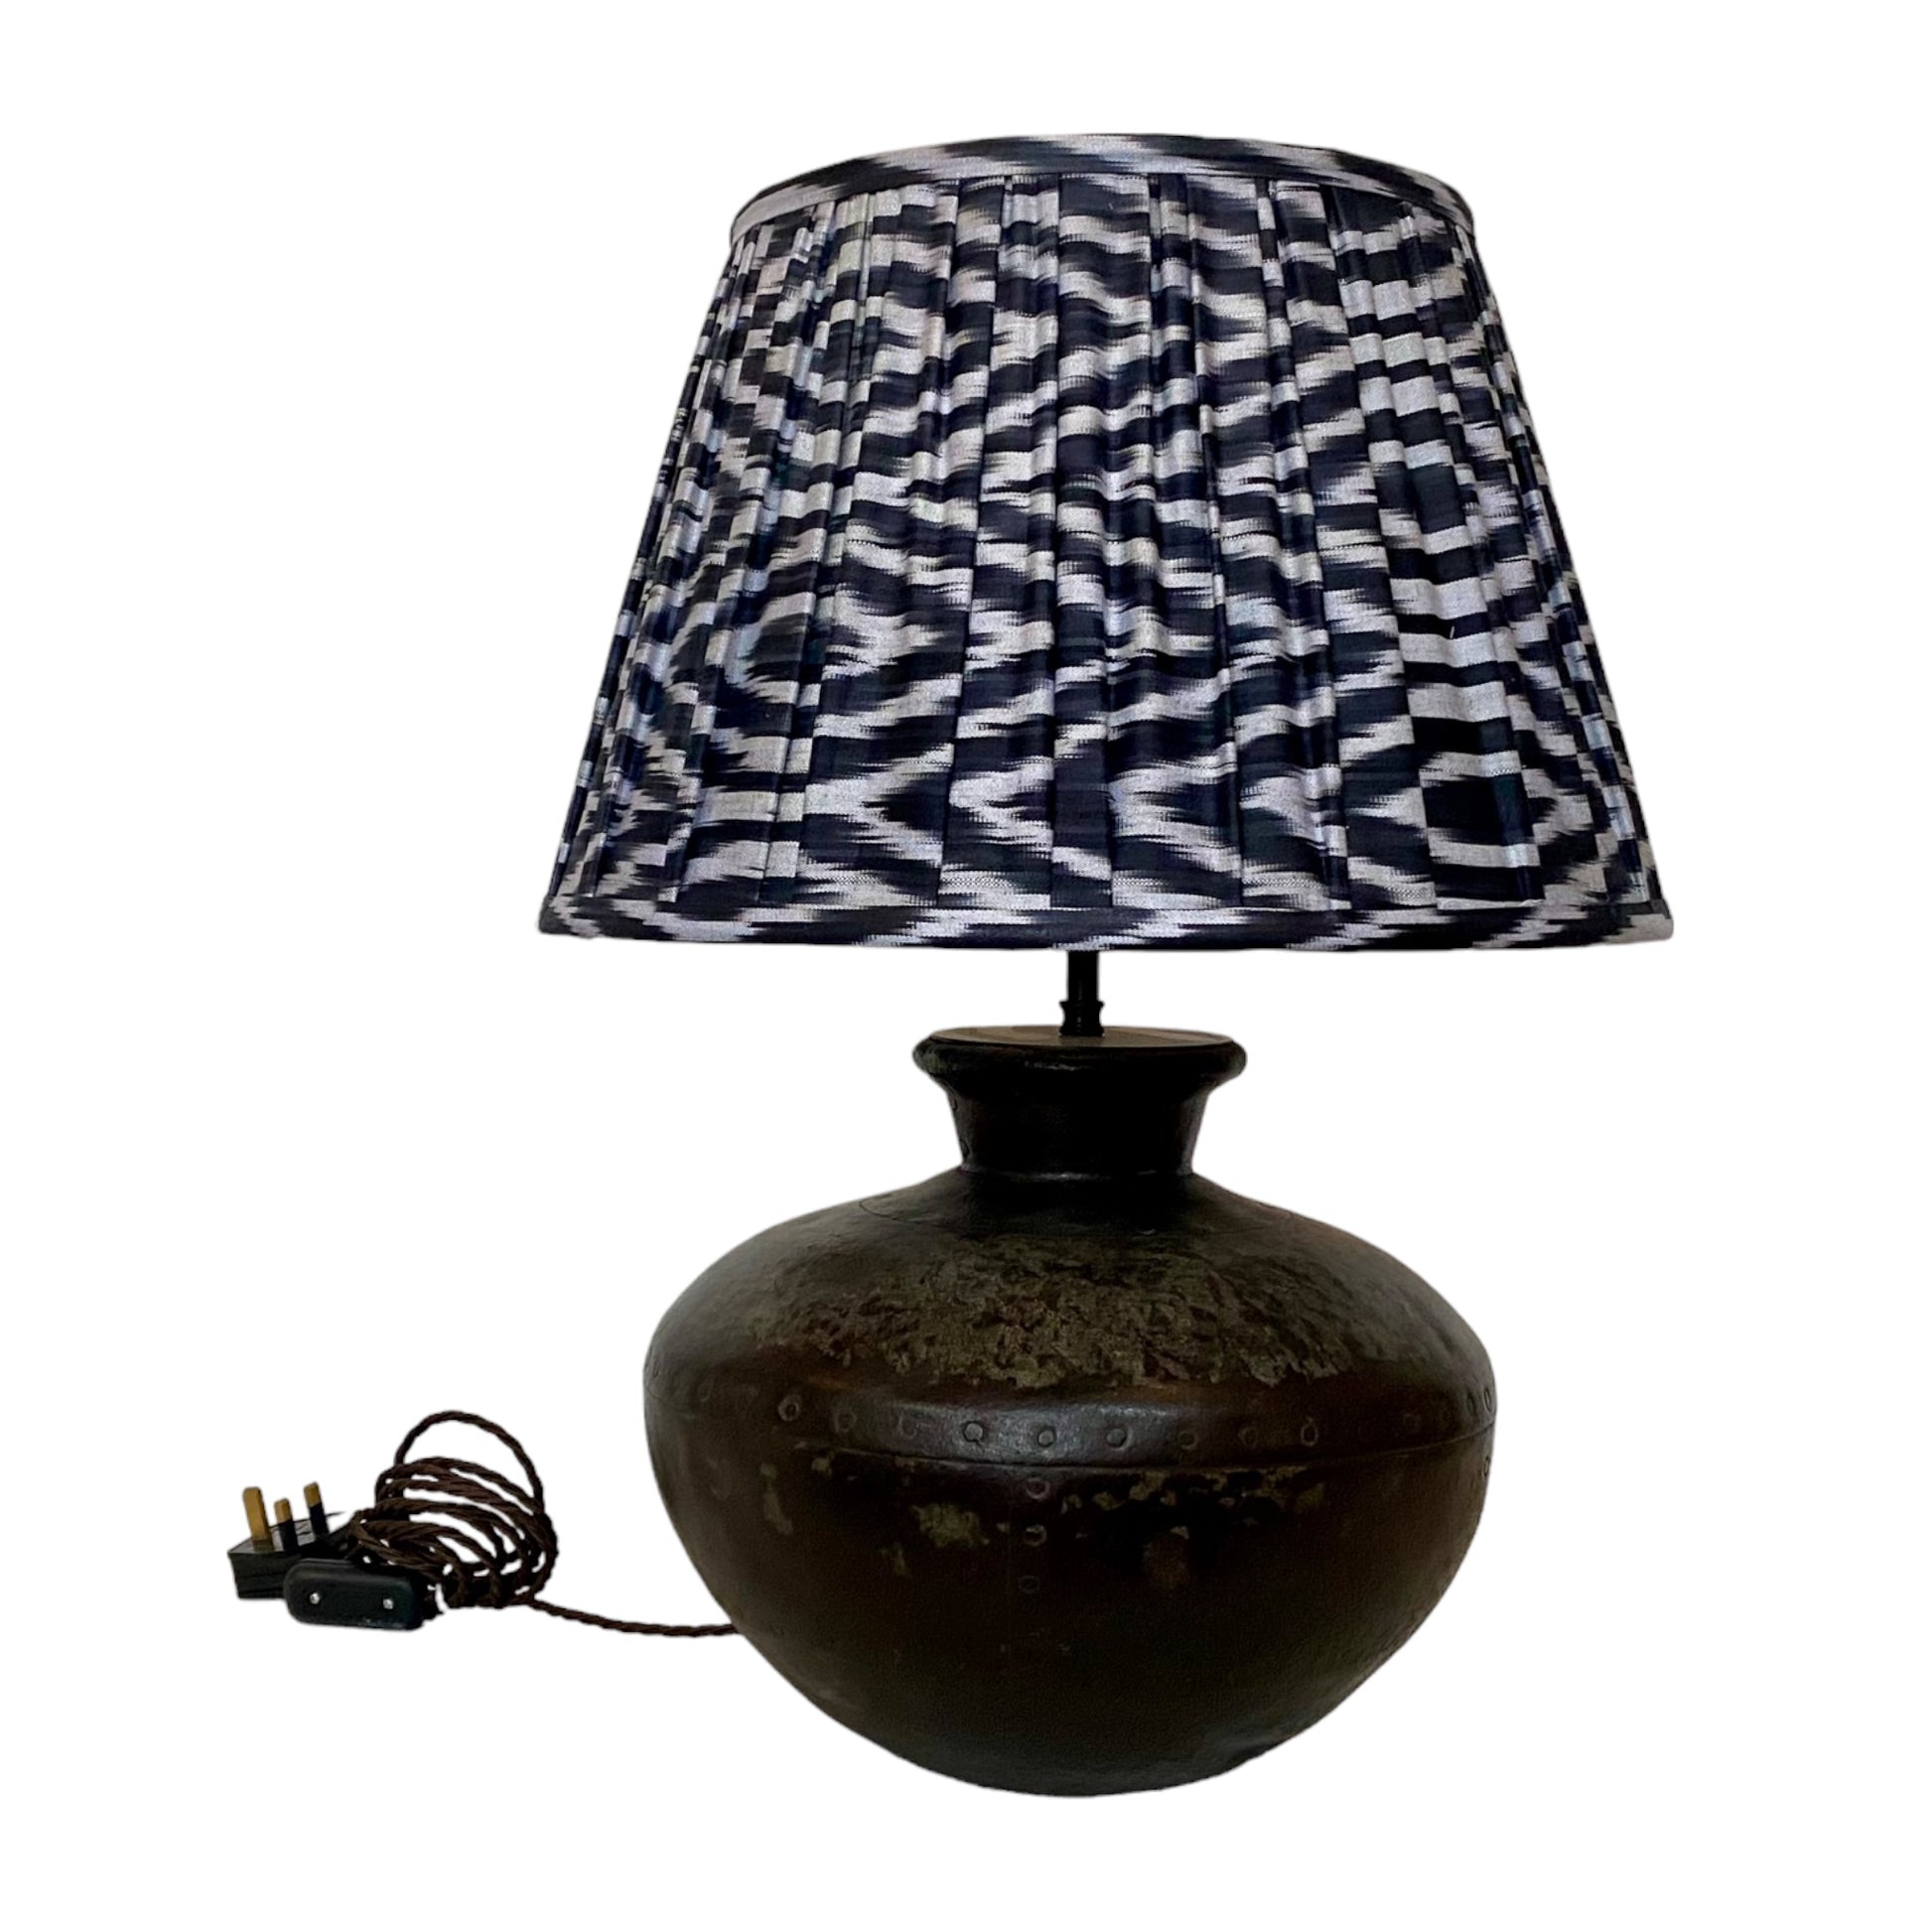 Black and grey ikat lampshade on Water carrier lamp base